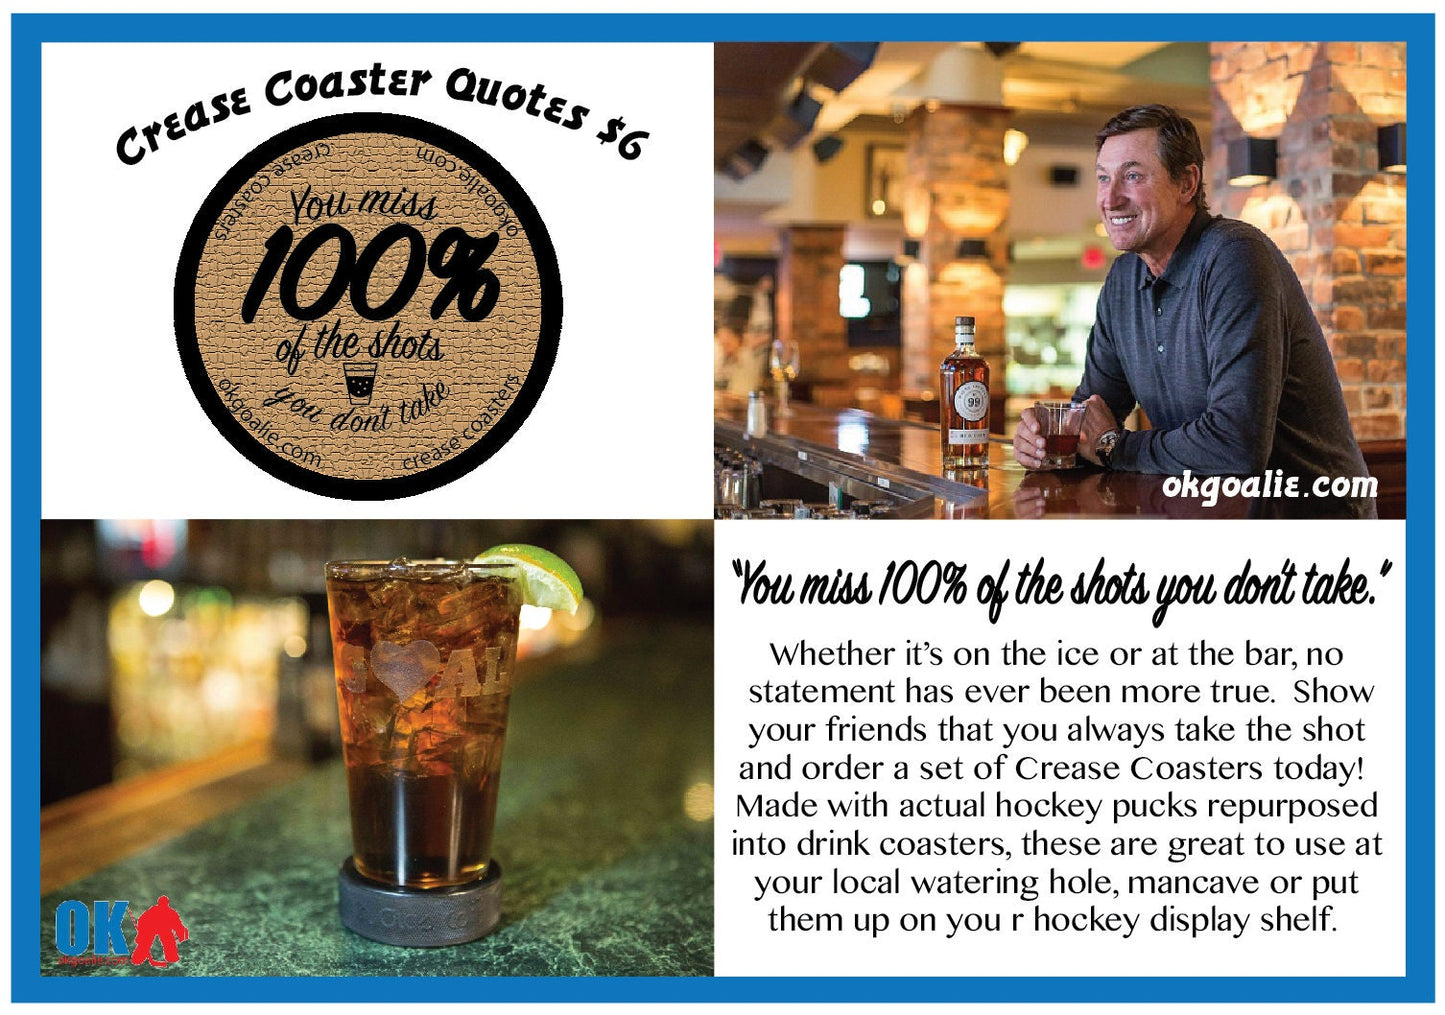 Crease Coaster Quoters- You miss 100% of the shots you don't take